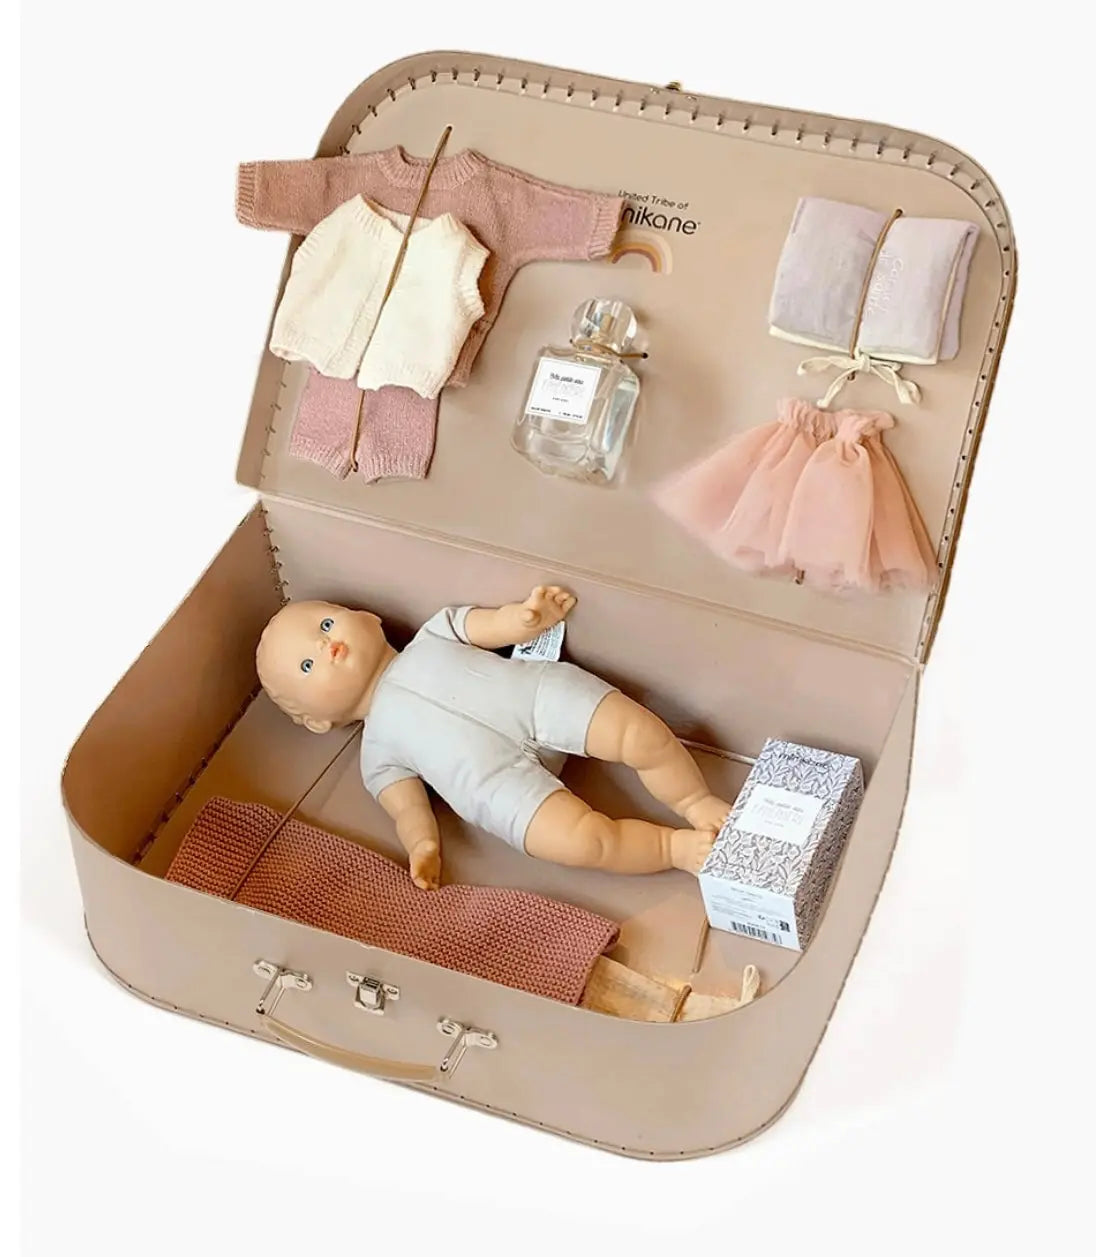 My Suitcase From Yesteryear “Birth Kit” Deluxe Pink Knit - Suzie Baby Doll  Minikane   